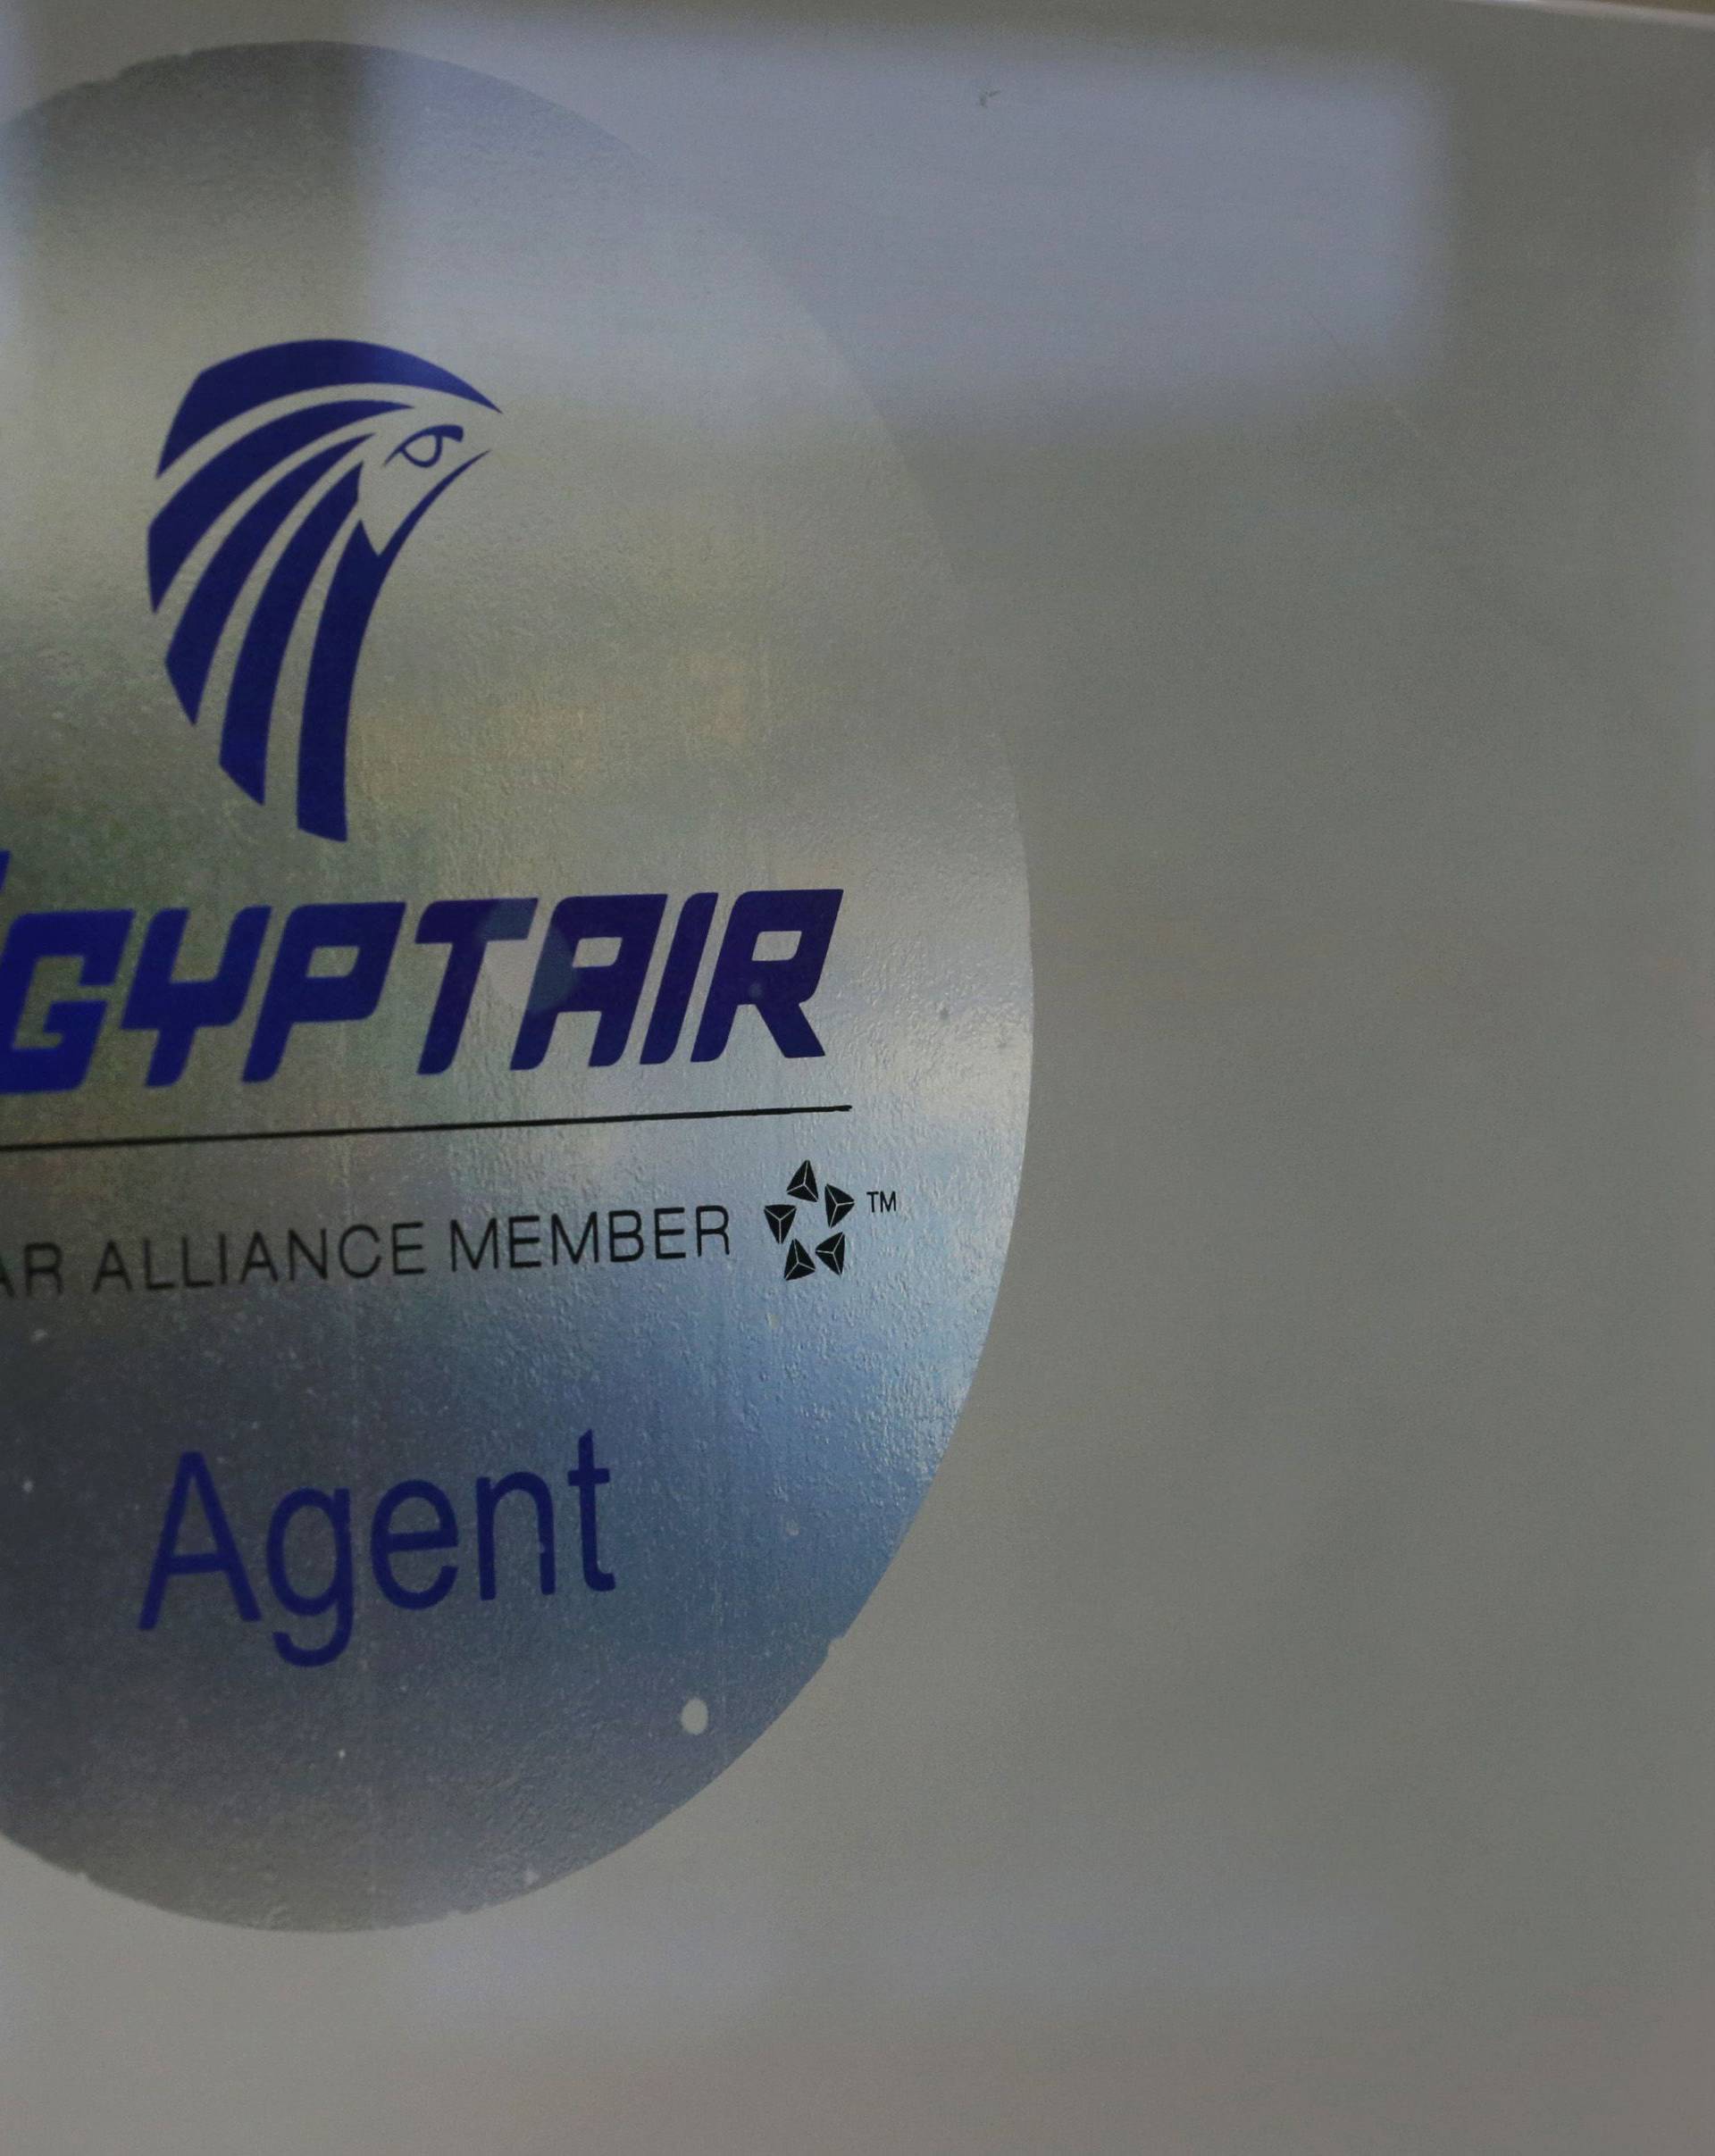 A man passes the Egyptair desk at Charles de Gaulle airport in Paris